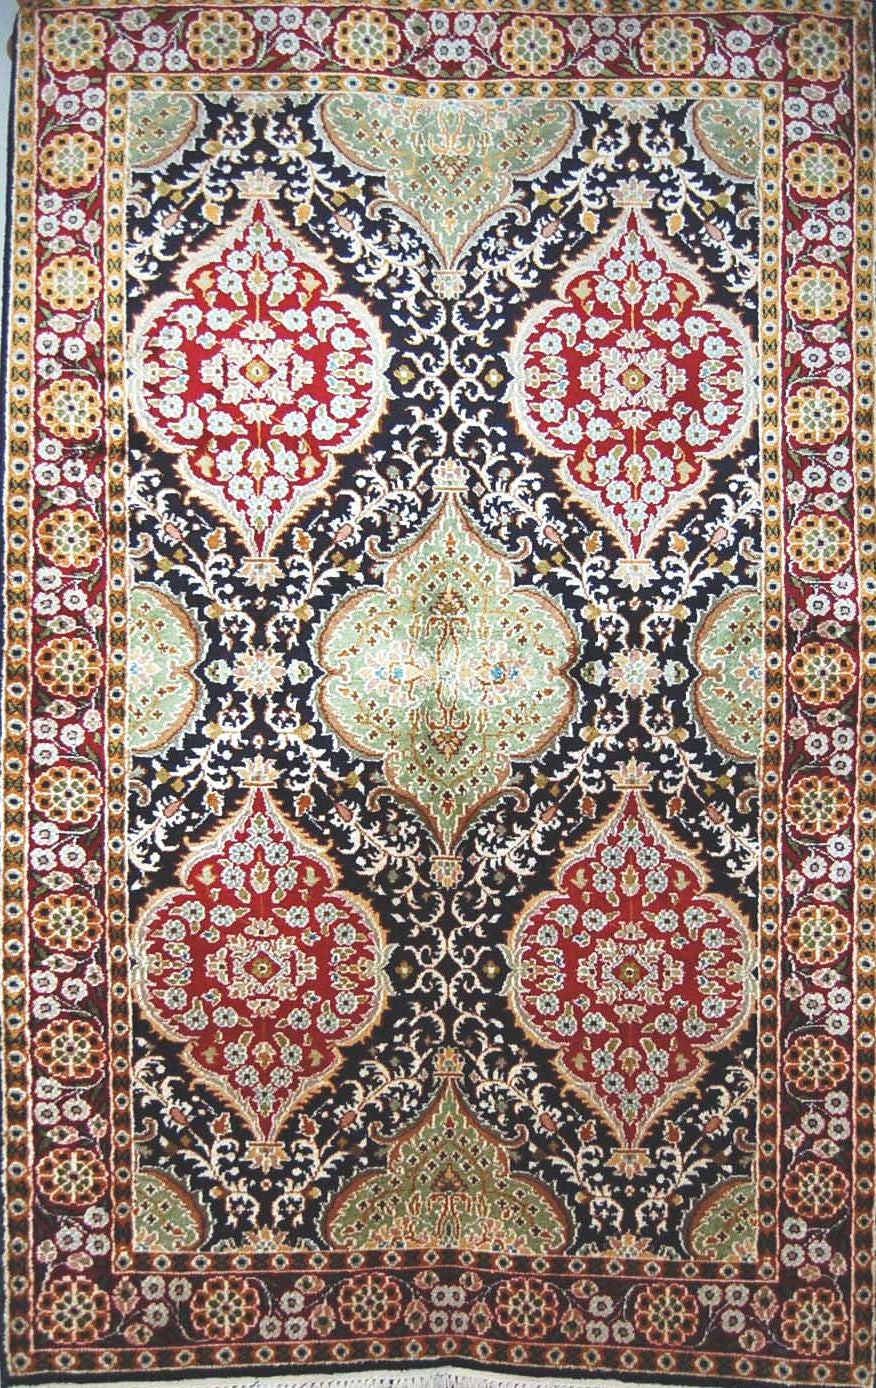 Kashmir Silk Carpet Hand Knotted, Red and Green 3'x5' #CPS15203